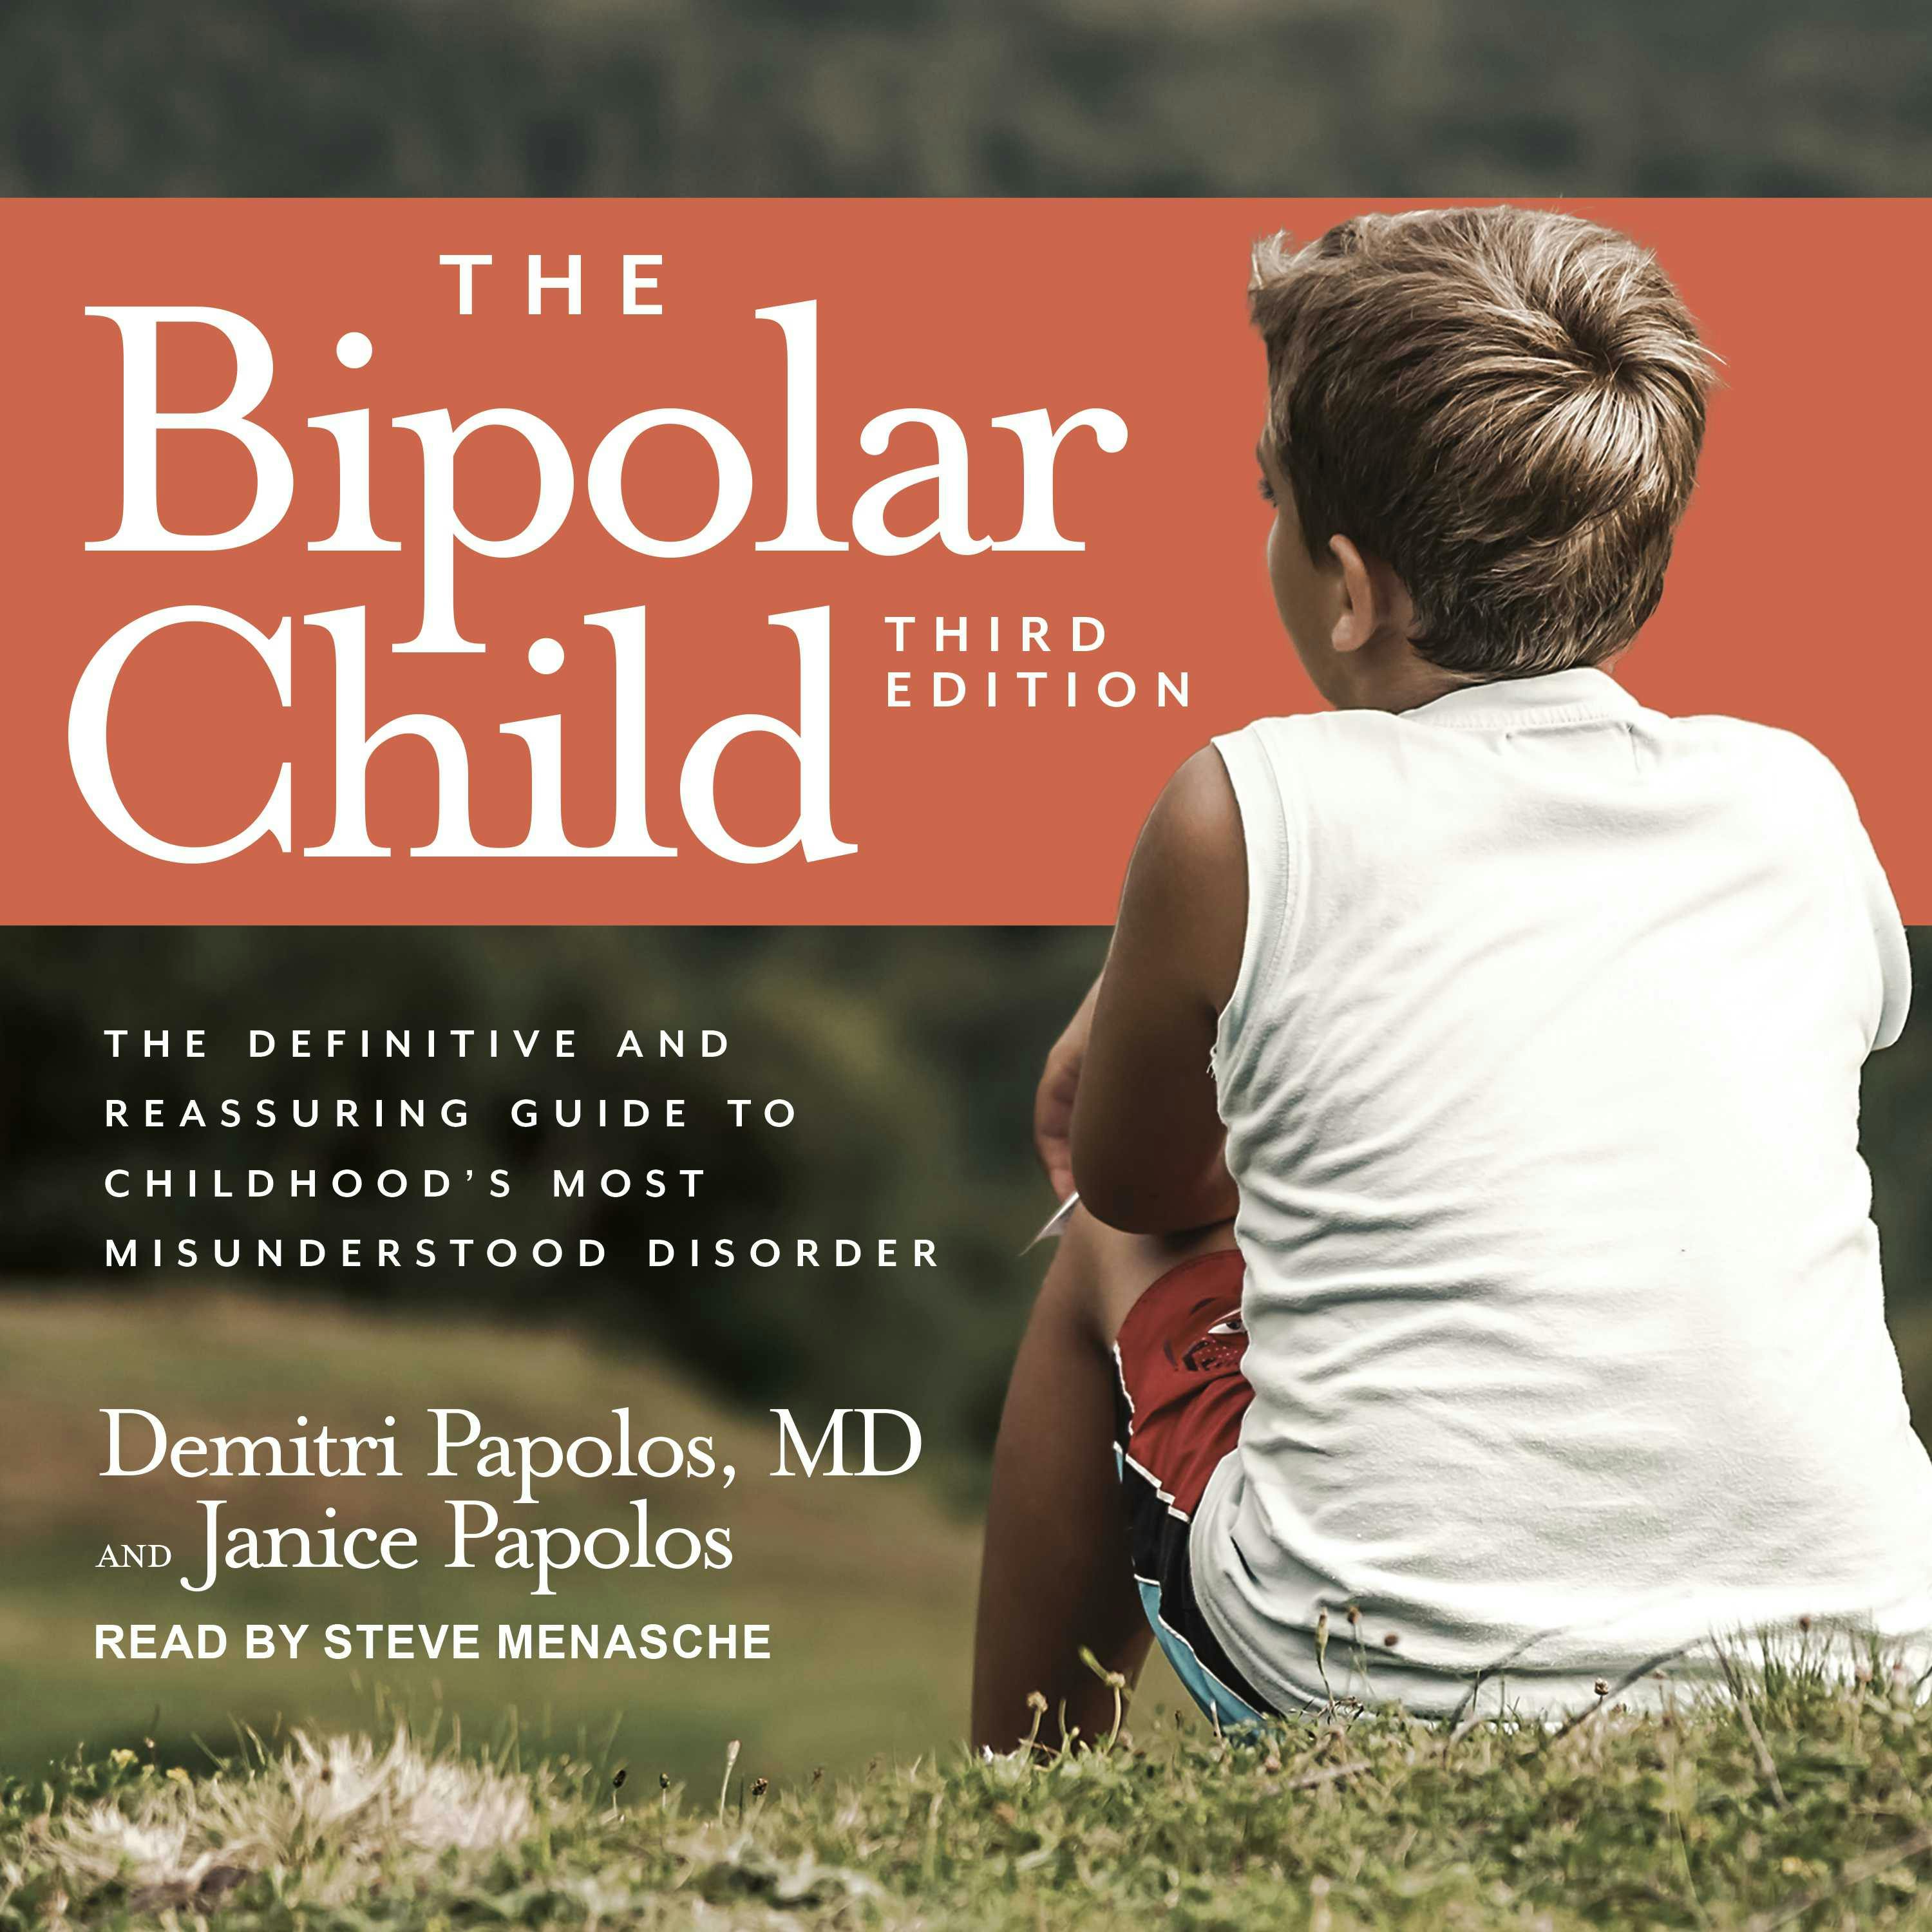 The Bipolar Child: The Definitive and Reassuring Guide to Childhood's Most Misunderstood Disorder (Third Edition) - Janice Papolos, Demitri Papolos, MD